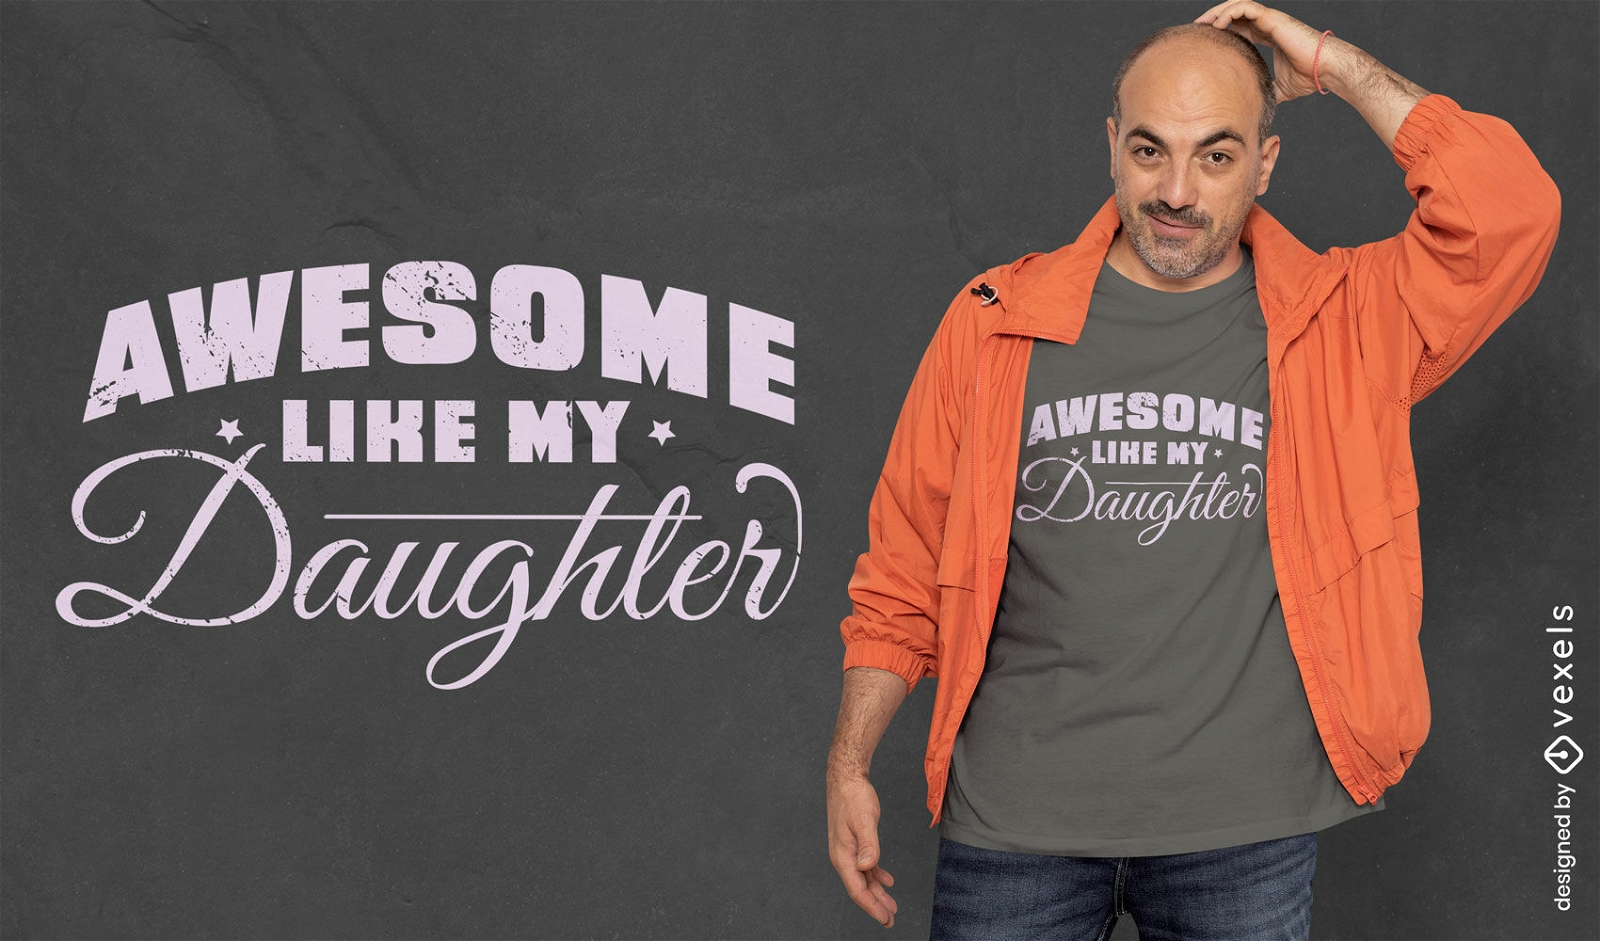 Awesome like my daughter t-shirt design